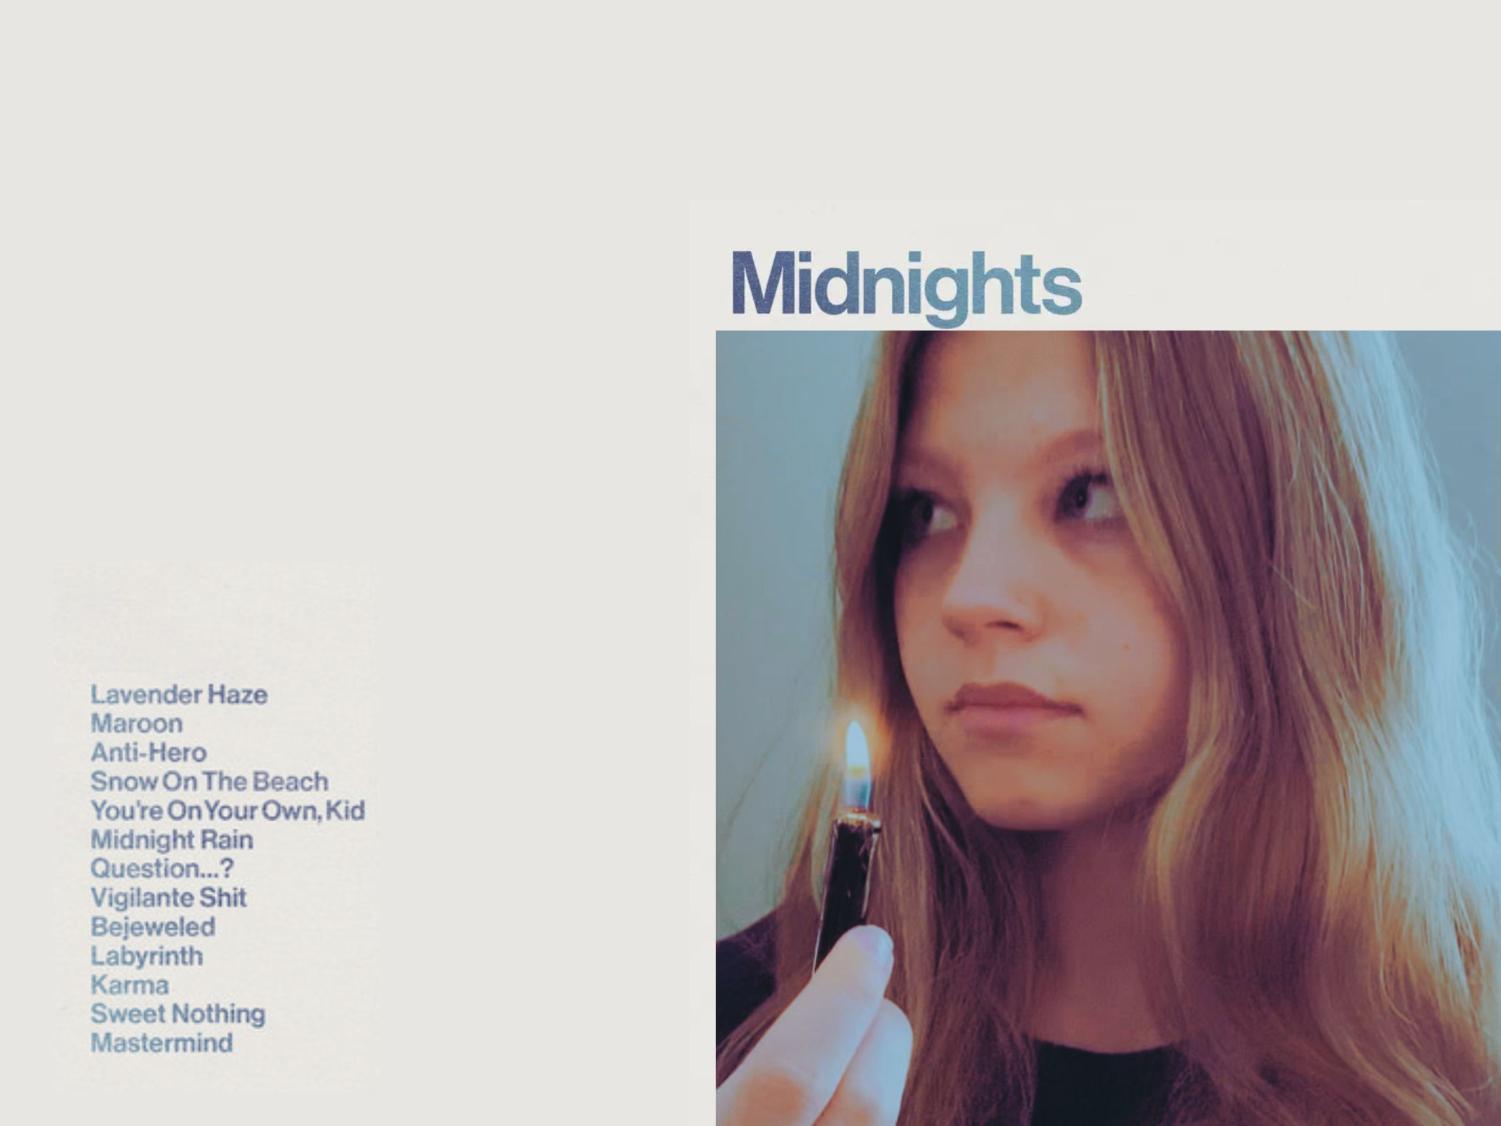 Taylor Swift: “Midnights” – The Chant